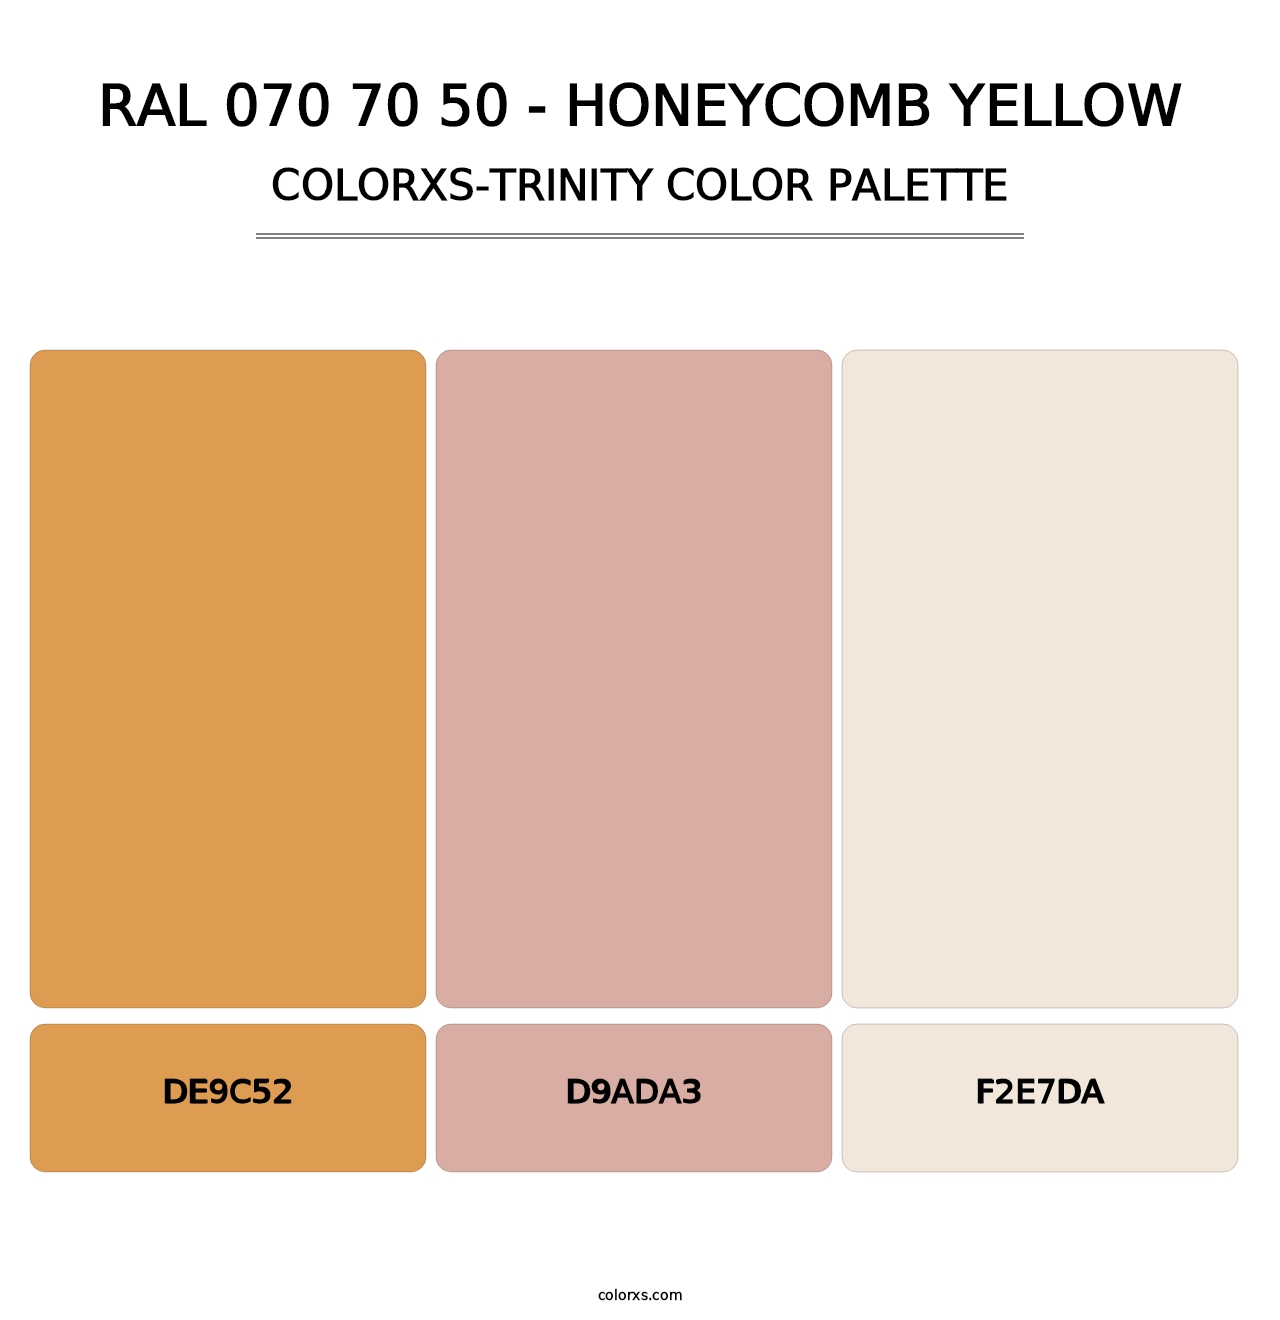 RAL 070 70 50 - Honeycomb Yellow - Colorxs Trinity Palette